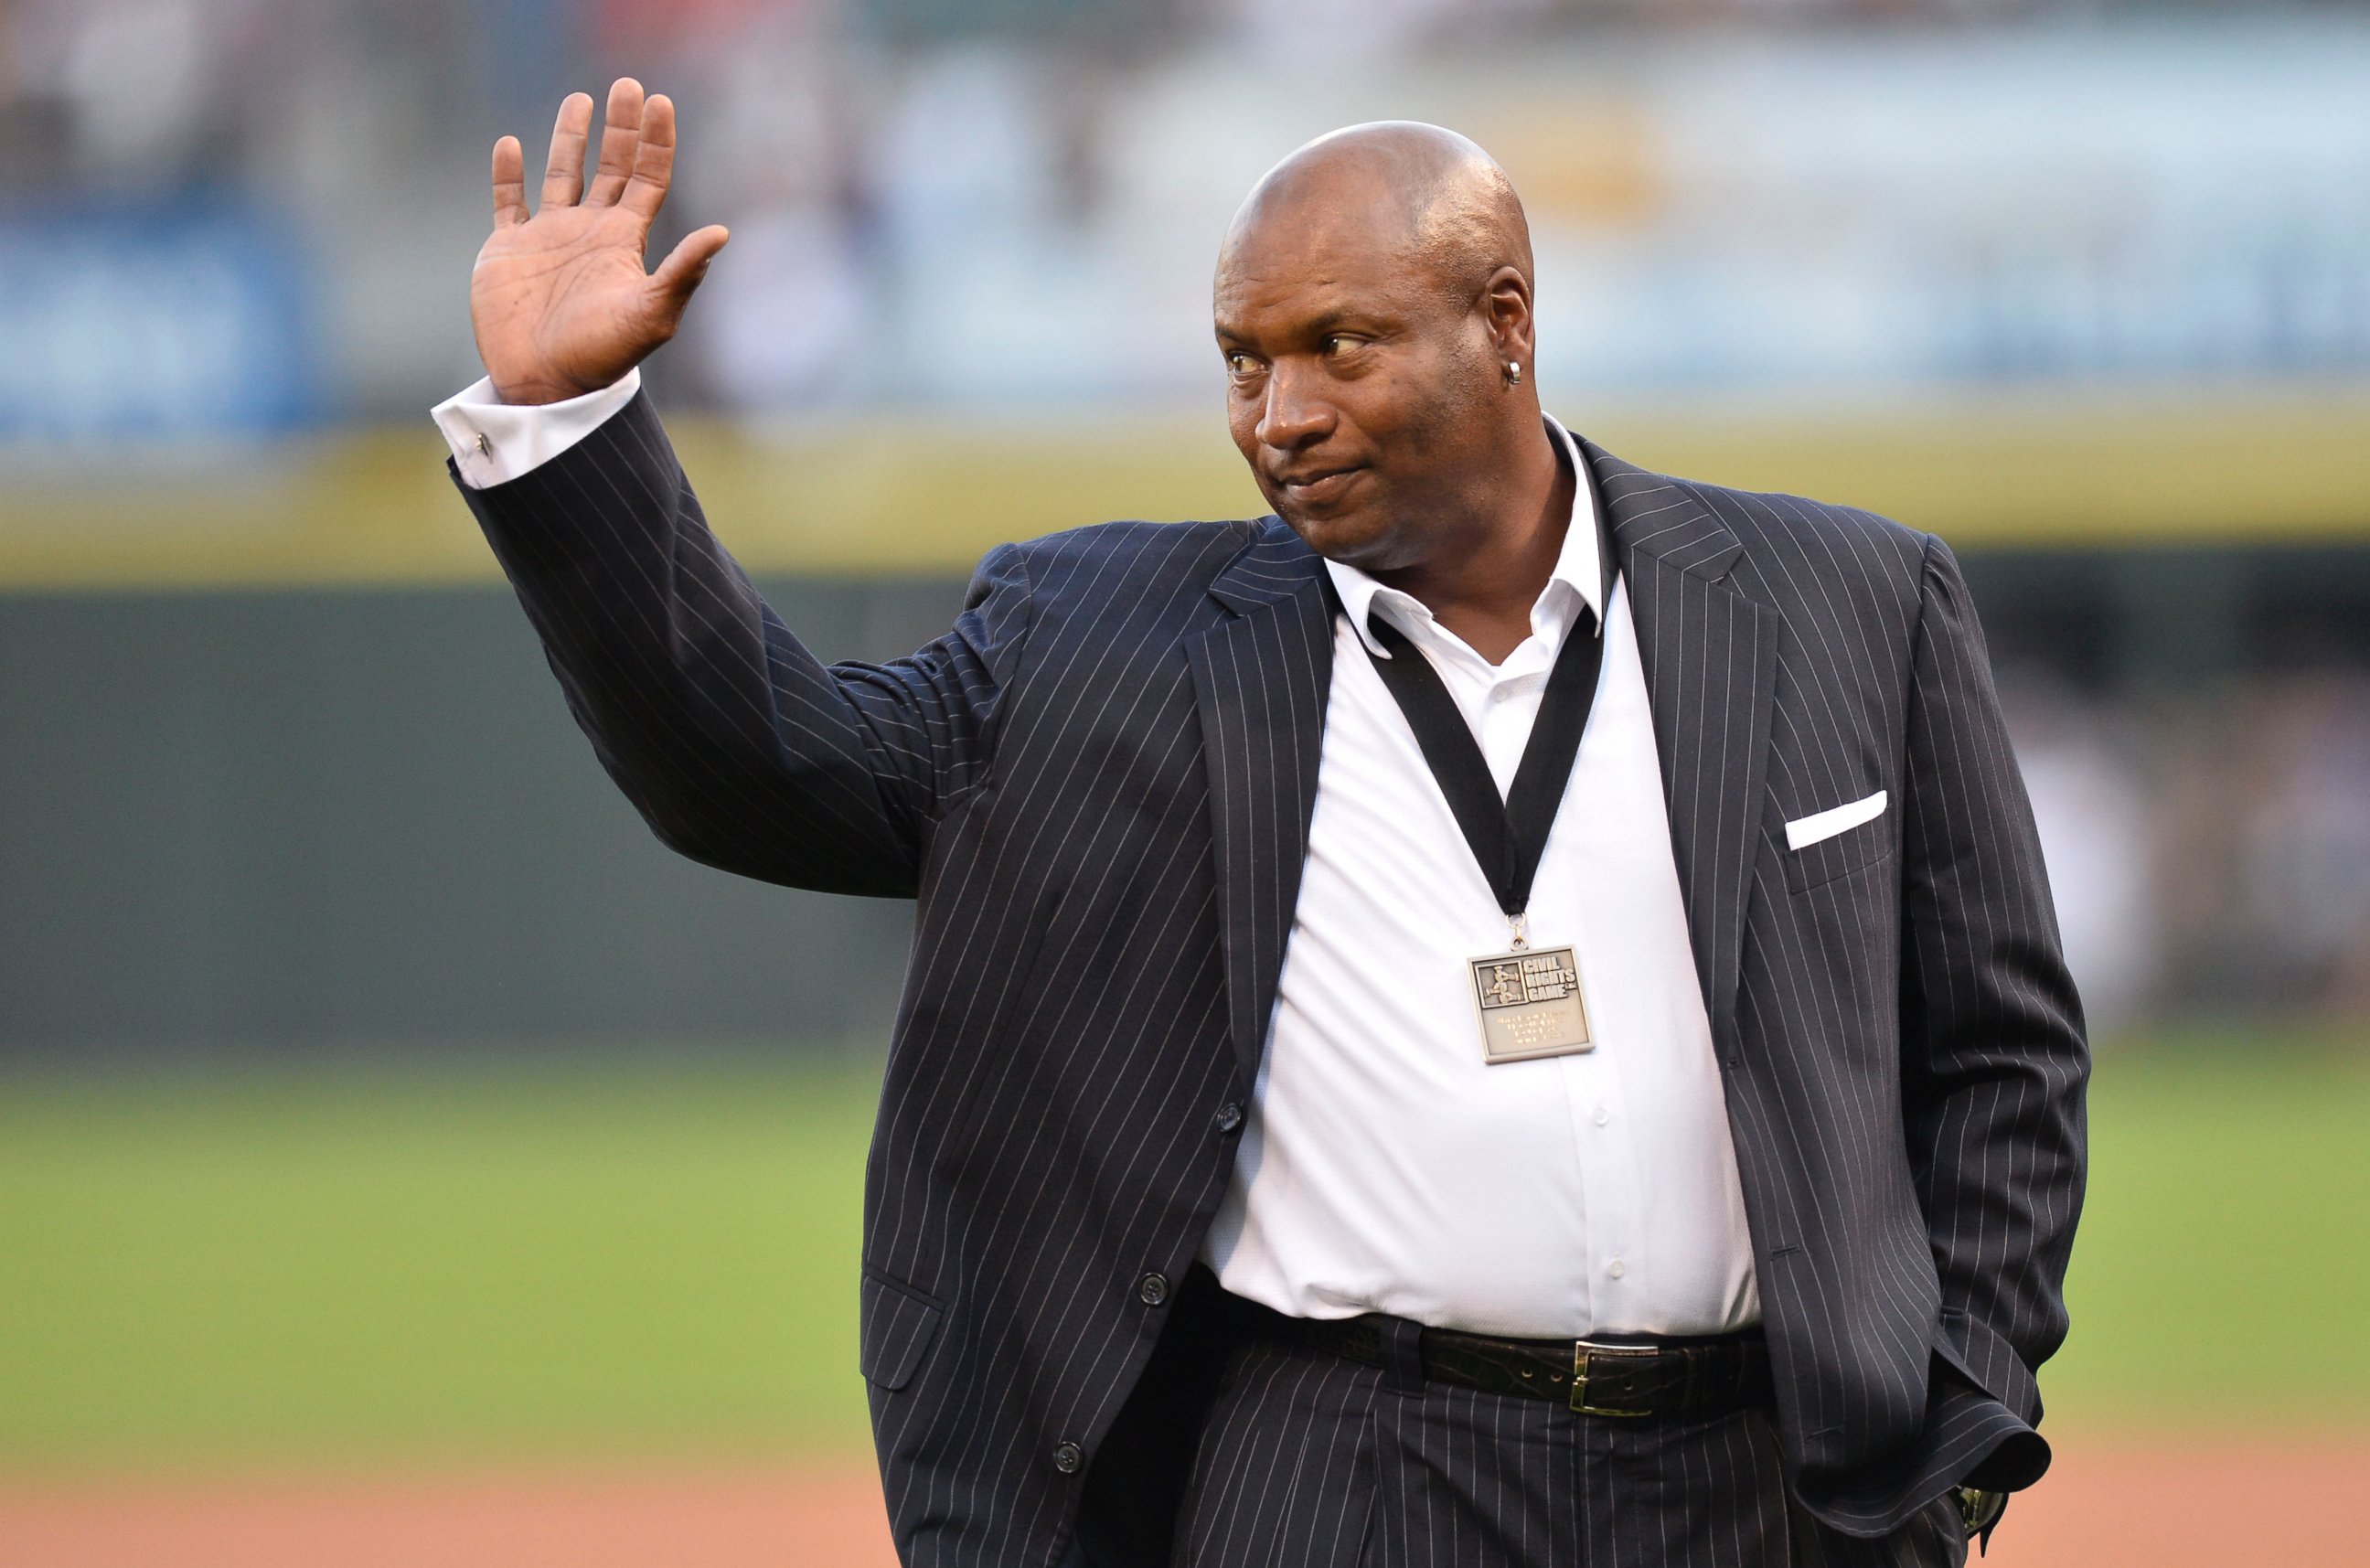 PHOTO: Bo Jackson waves to the crowd as as he is introduced before the 2013 Civil Rights Game between the Chicago White Sox and the Texas Ranger Aug. 24, 2013 in Chicago.